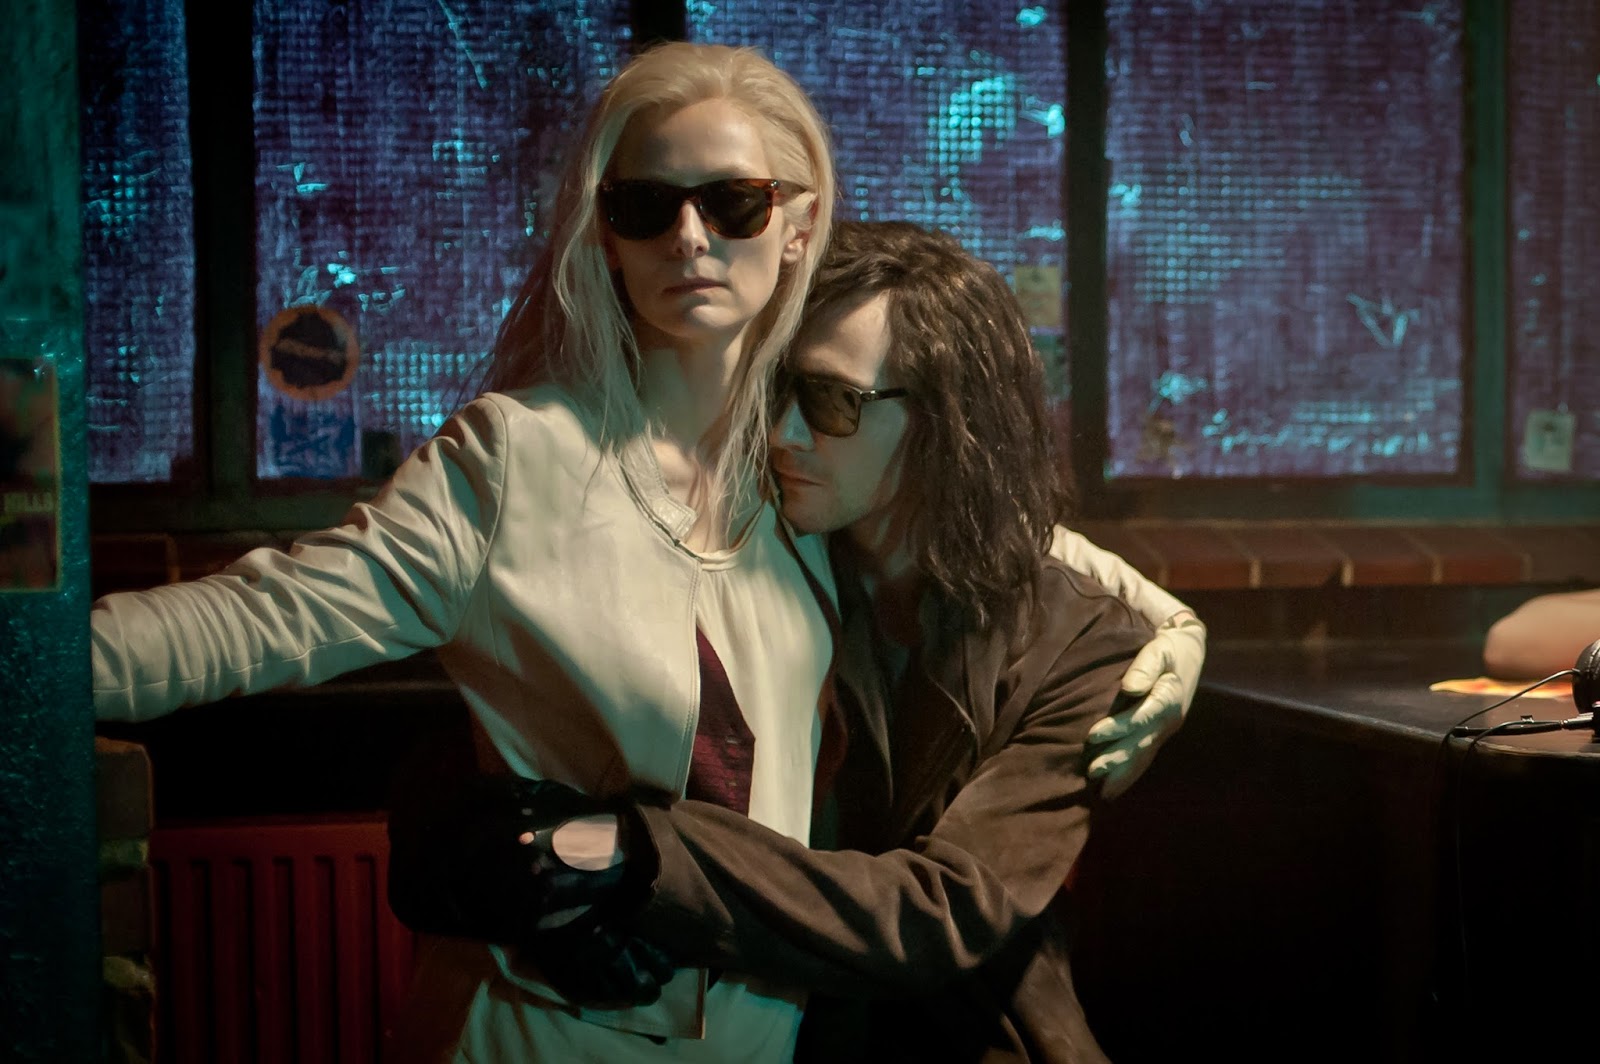 Movie Review: Only Lovers Left Alive